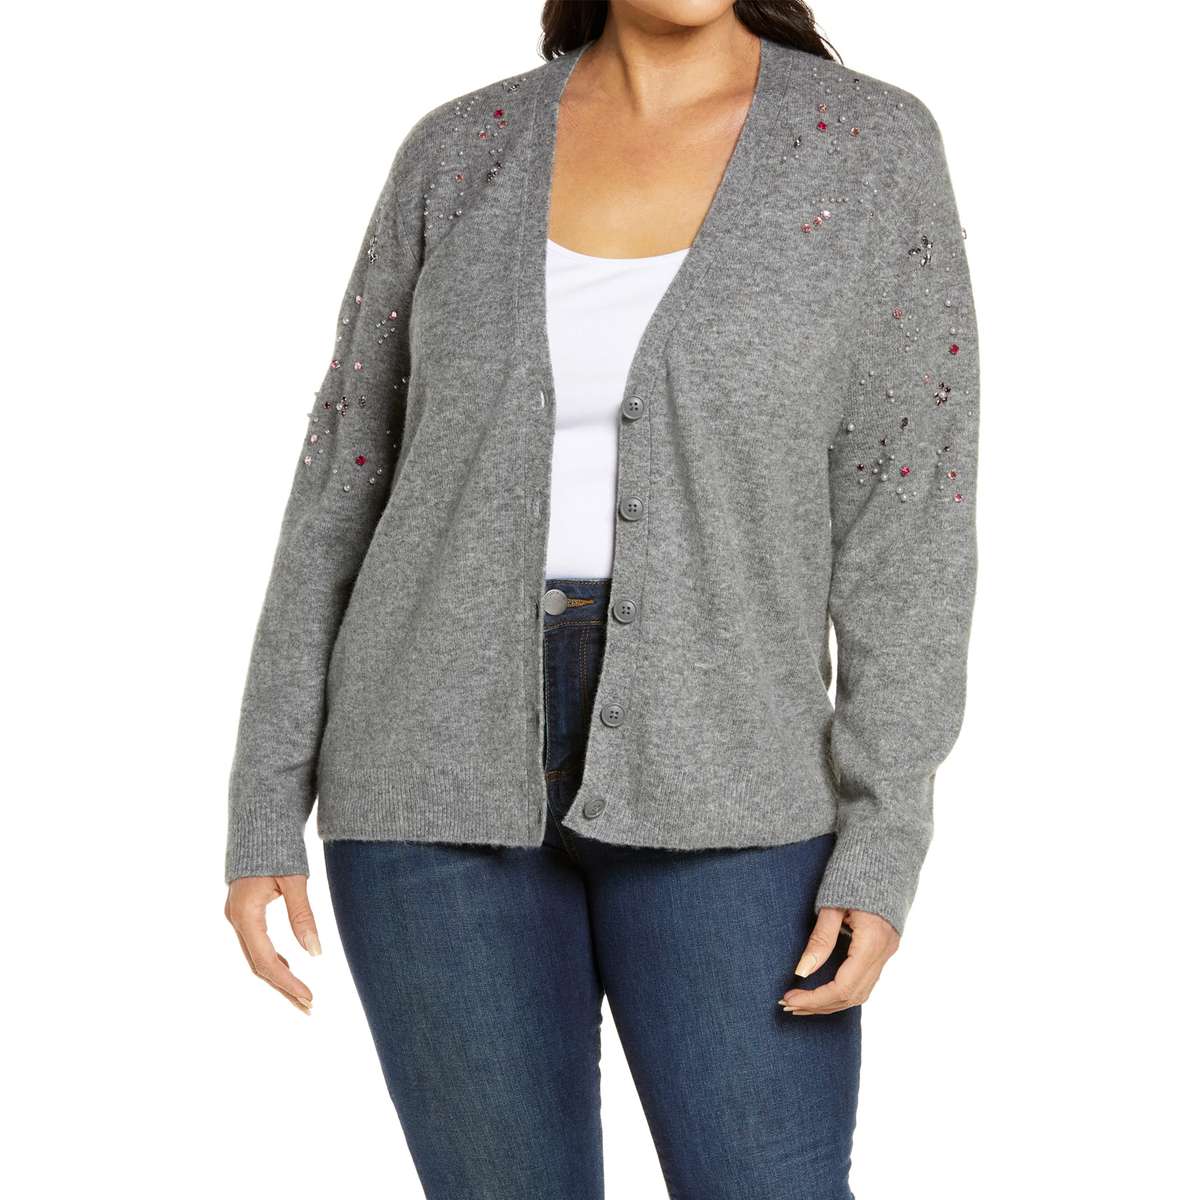 plus-sized woman wearing gray button up sweater with rhinestones on upper half